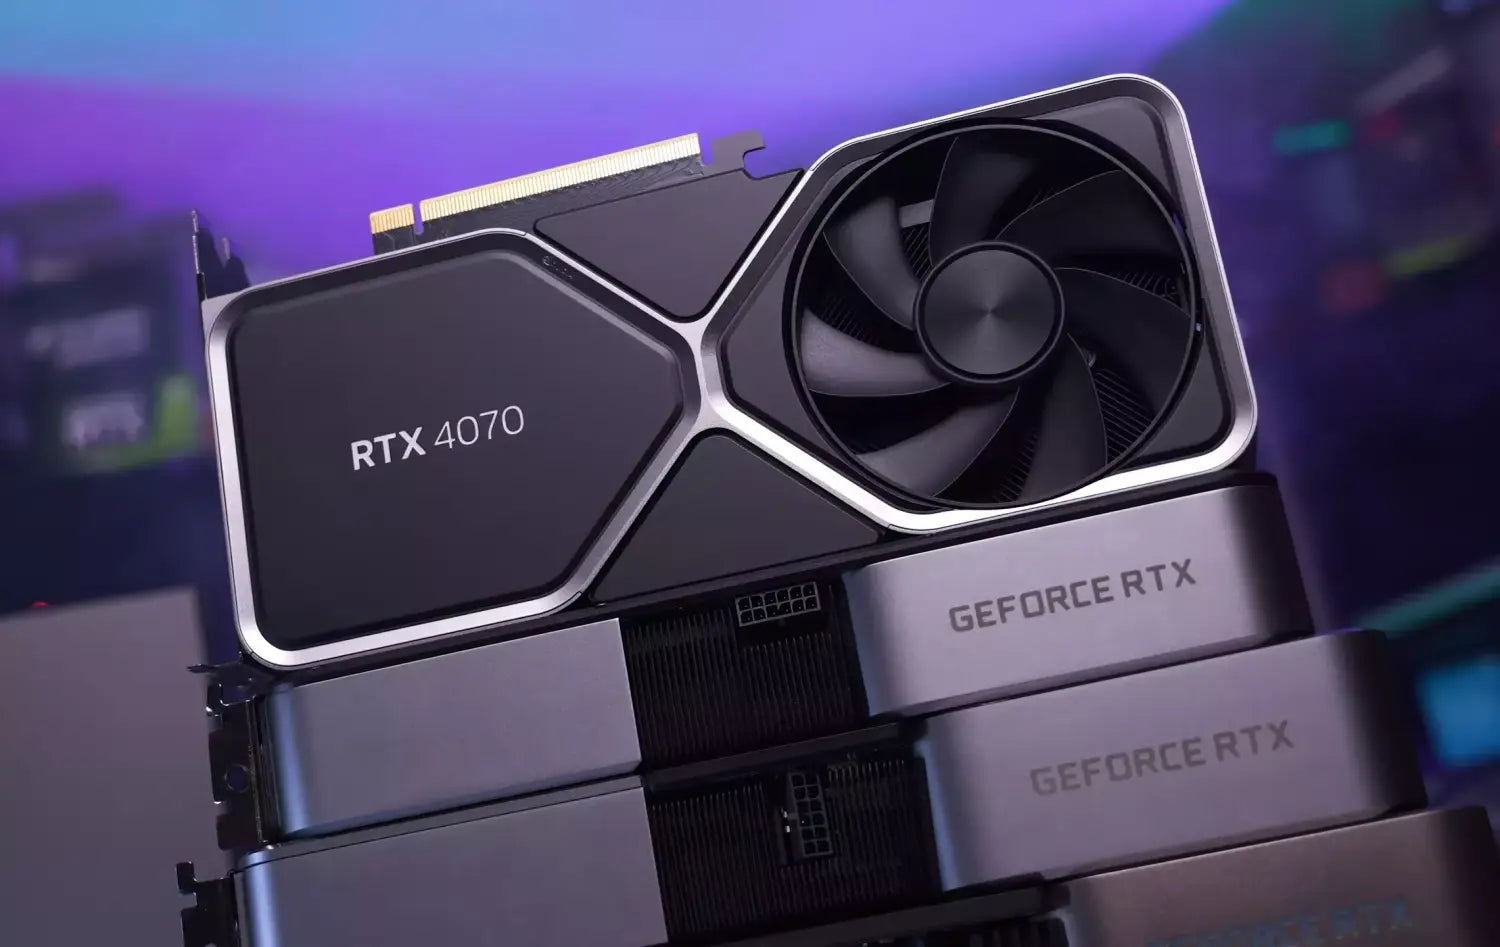 Nvidia Responds So AMD Can’t Win: September GPU Pricing